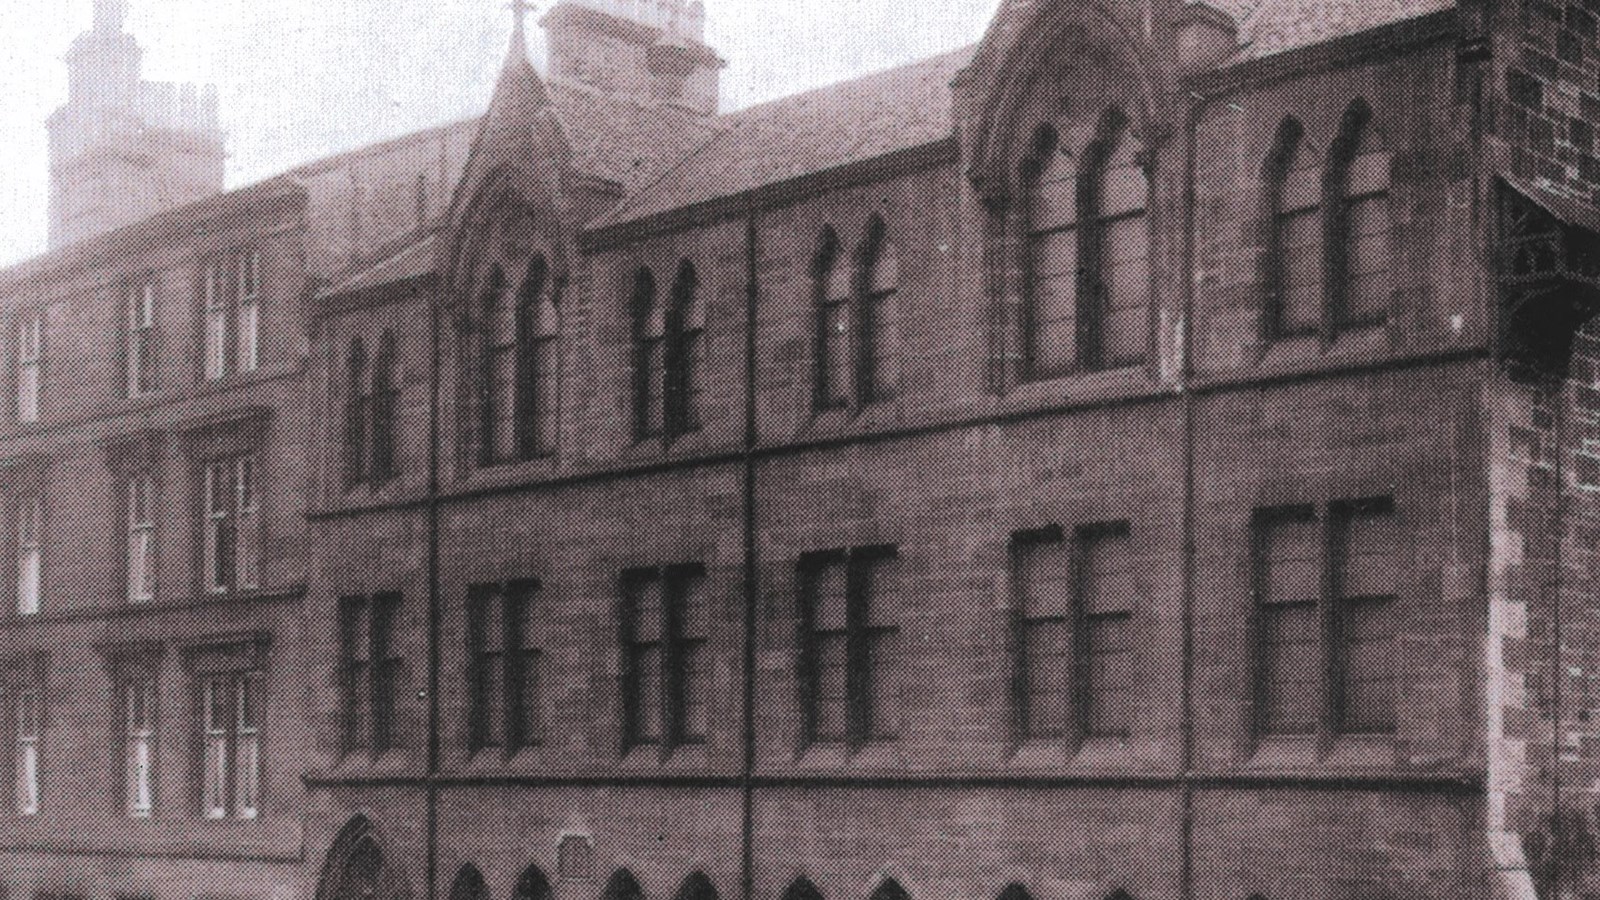 A photograph of a Boys' Brigade large red sandstone building with a slate roof with a black iron gate surrounding it.